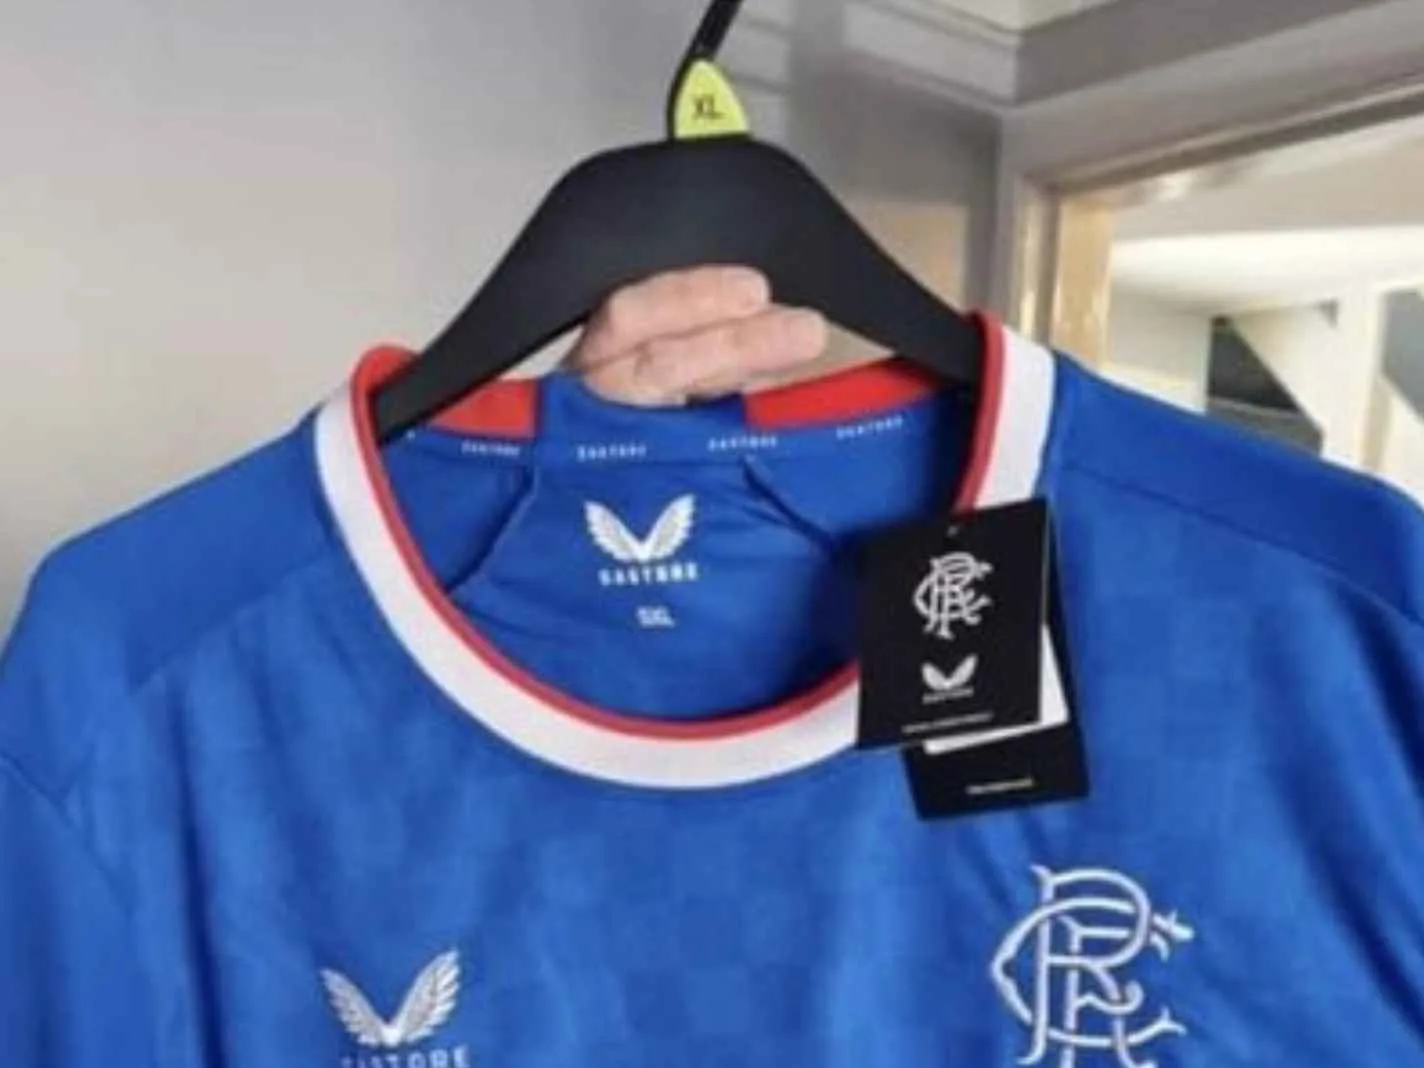 Did Castore send 2223 Rangers home kit by accident